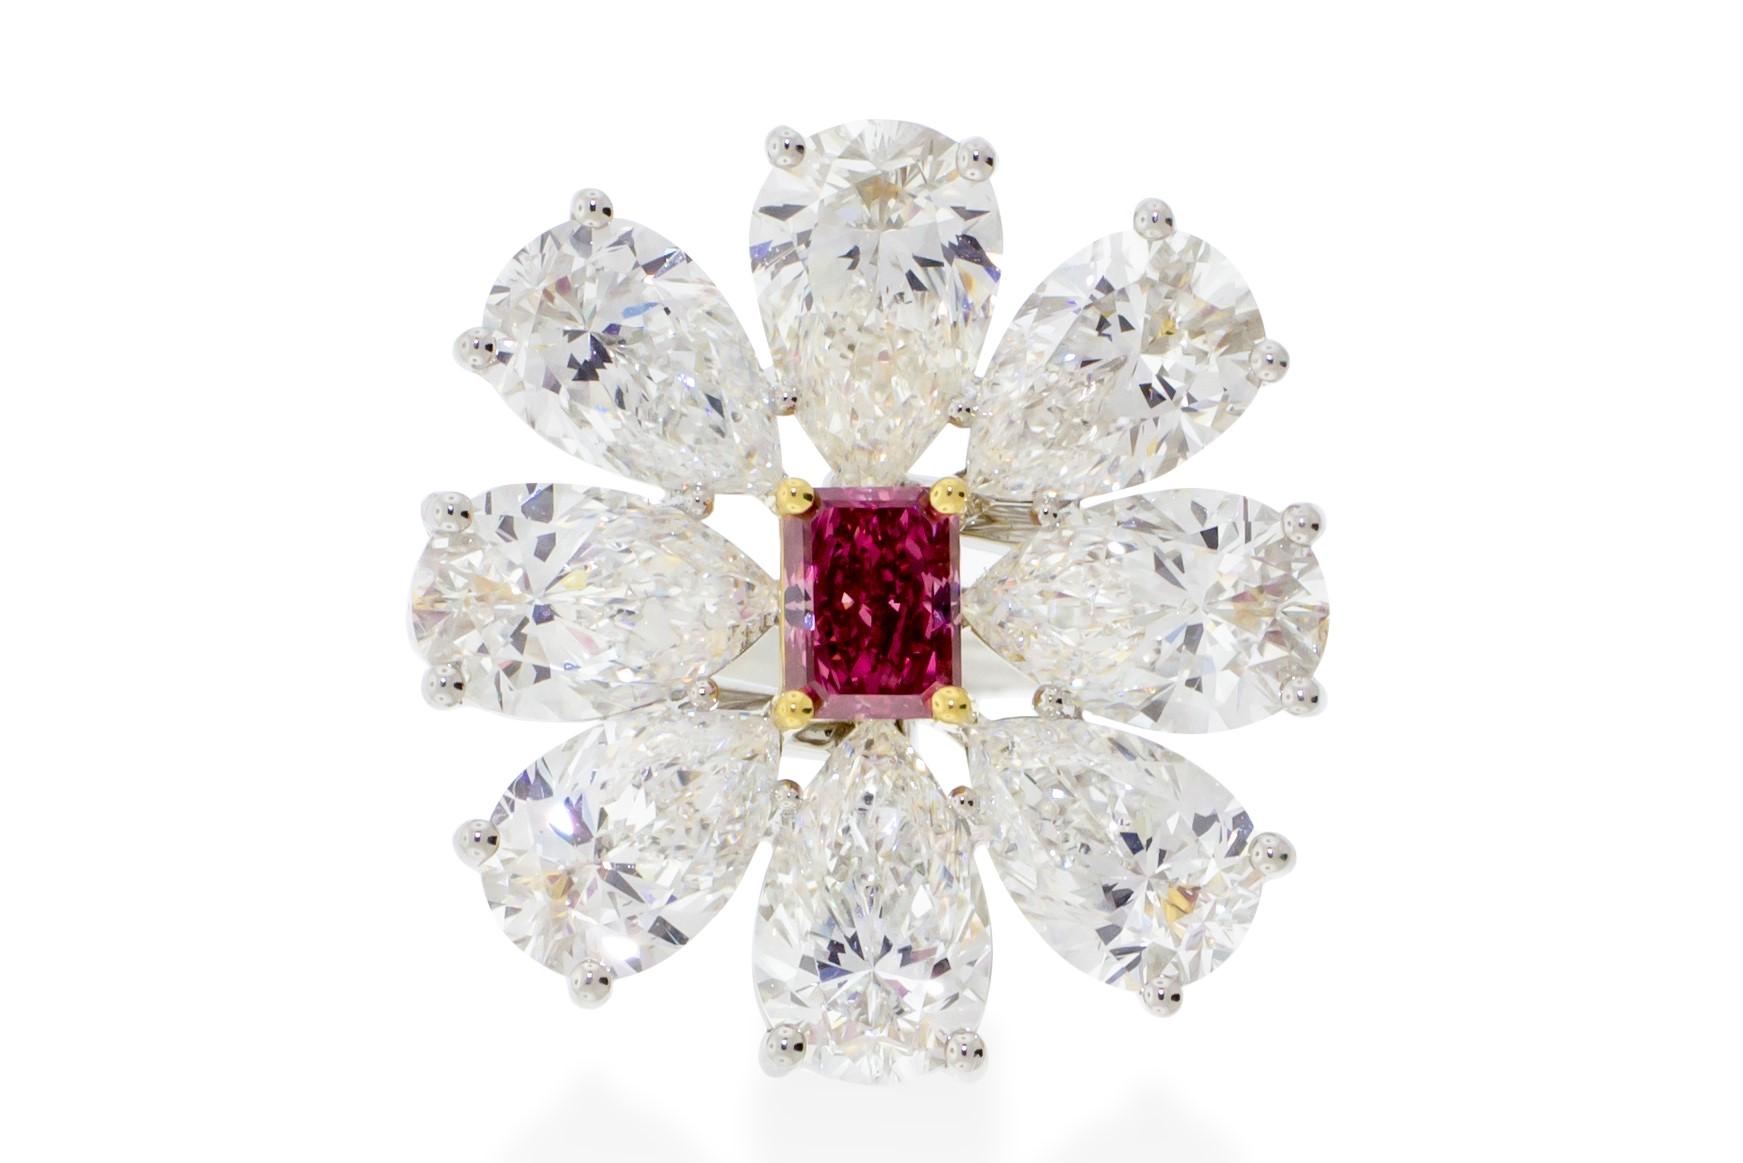 A 0.44 carat fancy vivid pink radiant cut center stone set in 18K yellow gold surrounded by 8 pear shapes diamonds weighing 6.12 carats set in platinum that come together to make a beautiful delicate flower. GIA certified. Report No. 1172177345.